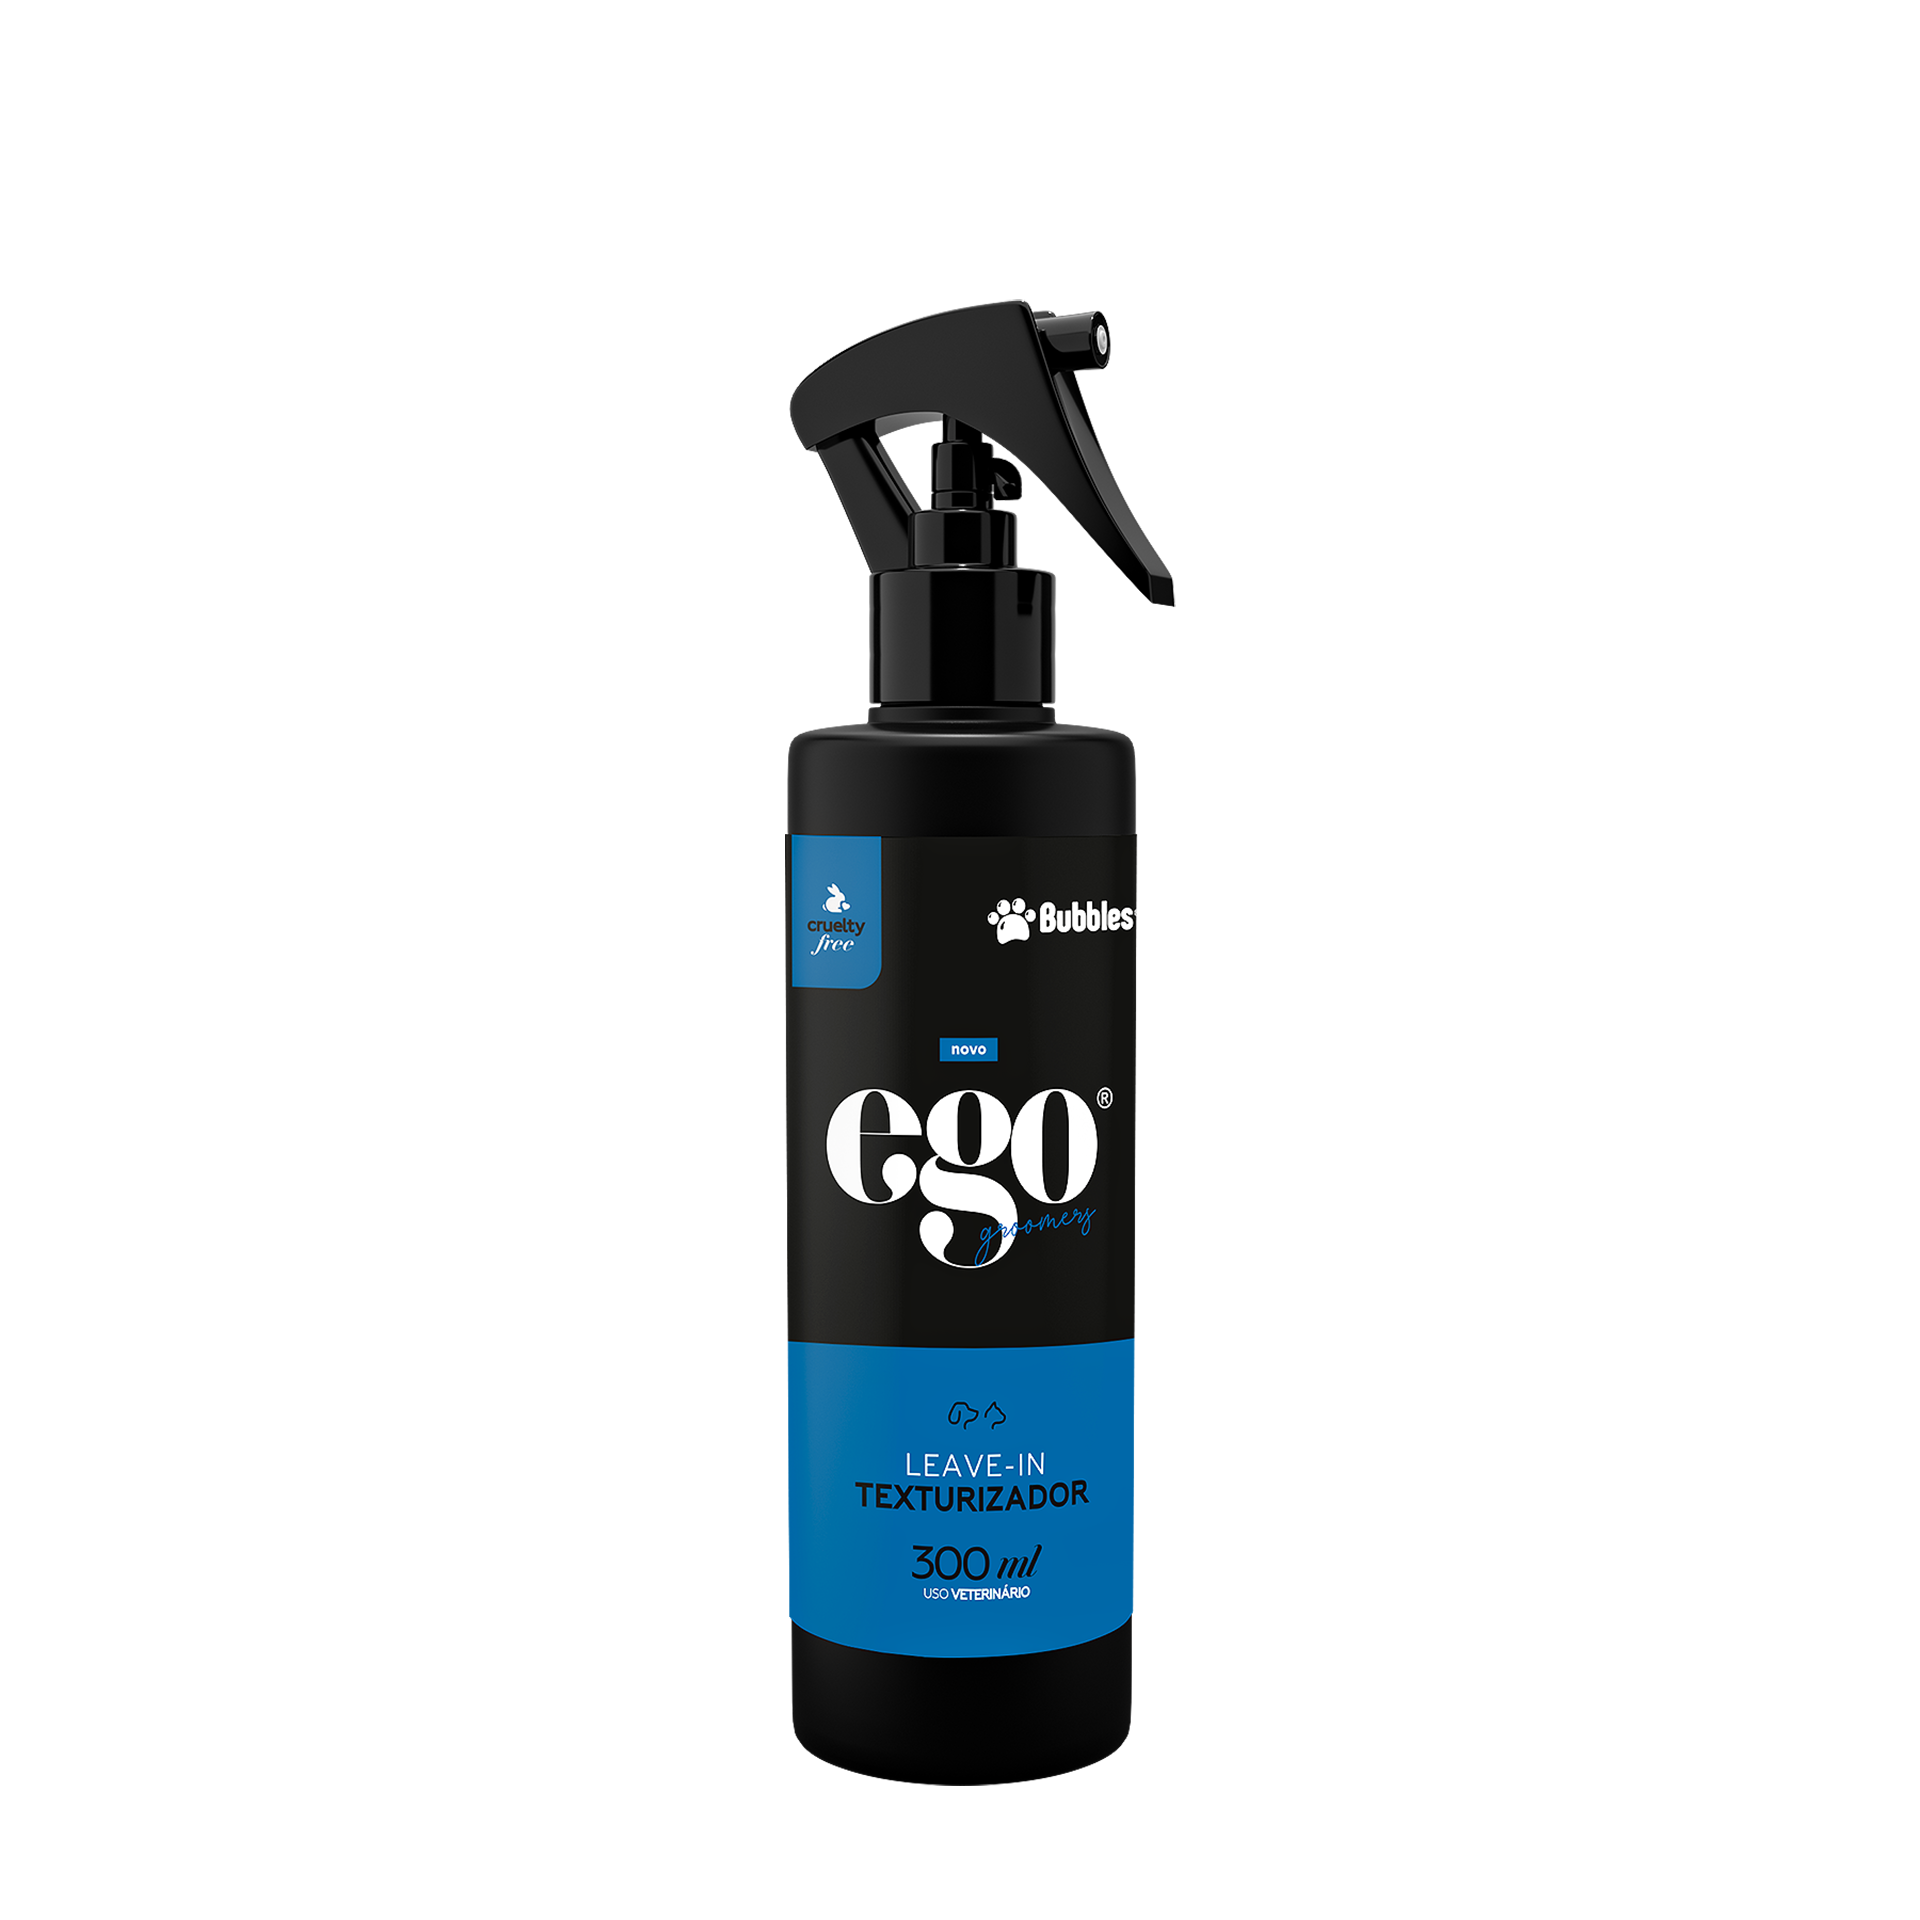 EGO - LEAVE-IN TEXTURIZADOR 500ml